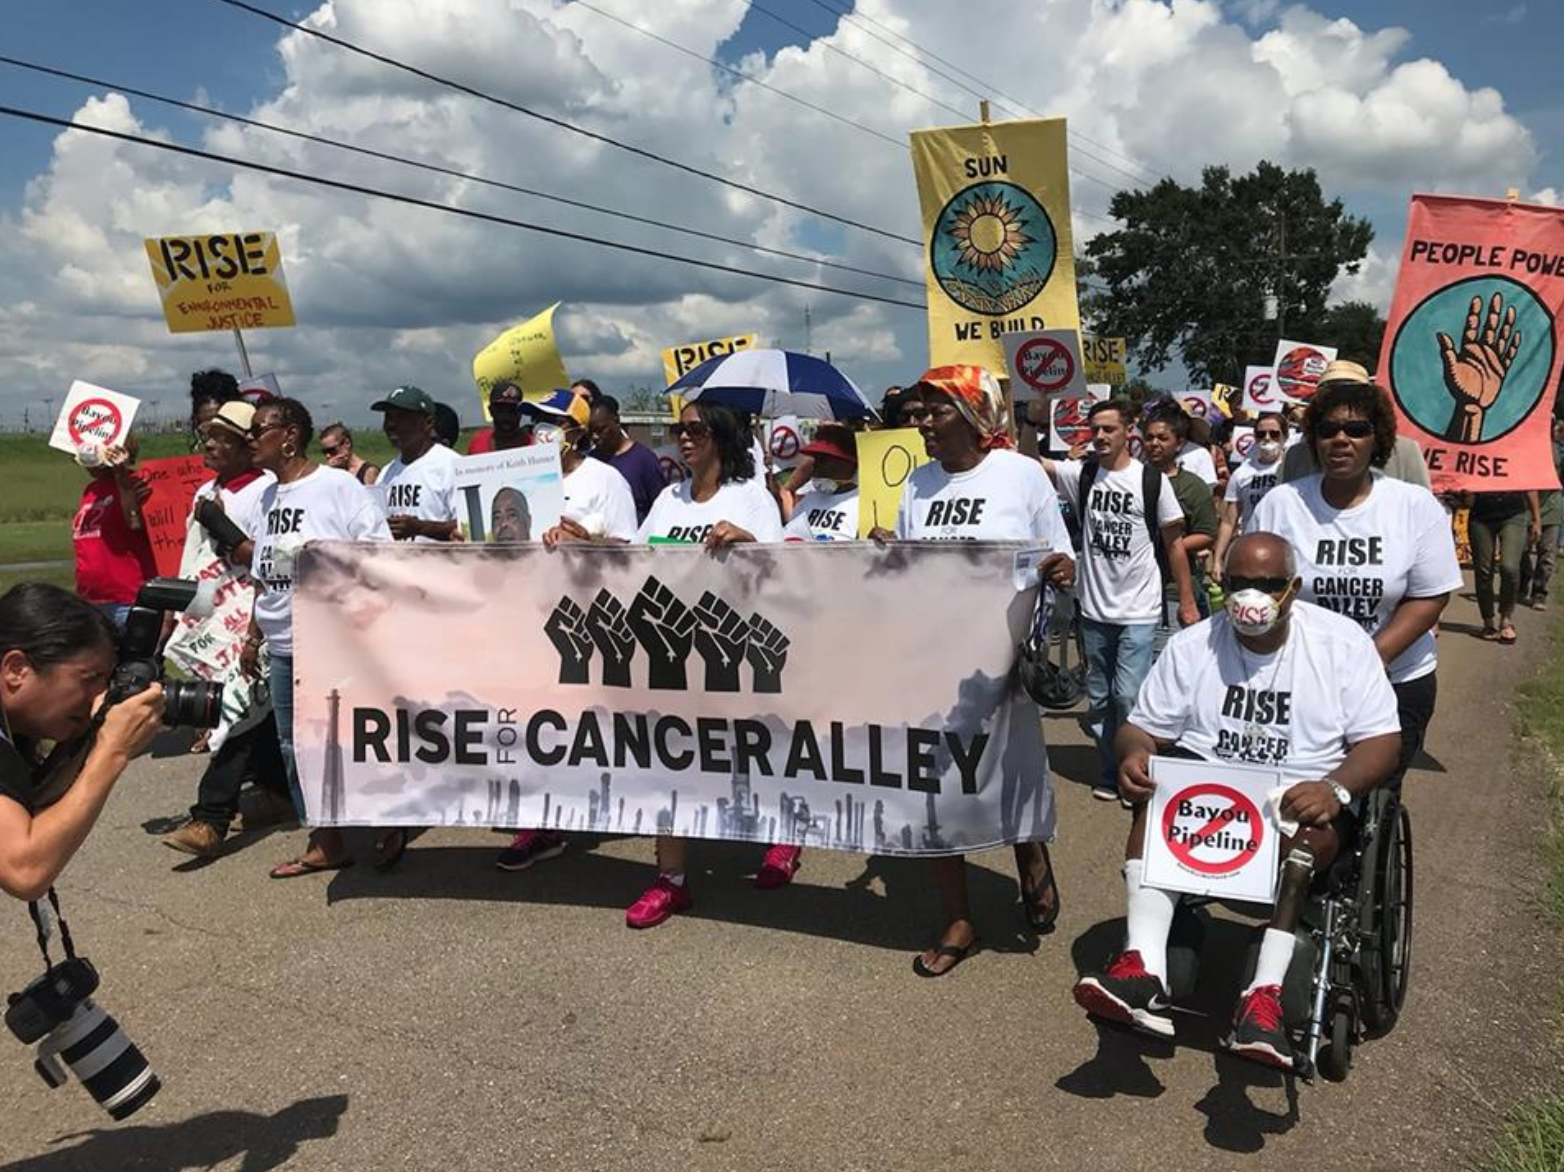 Cancer Alley Protest